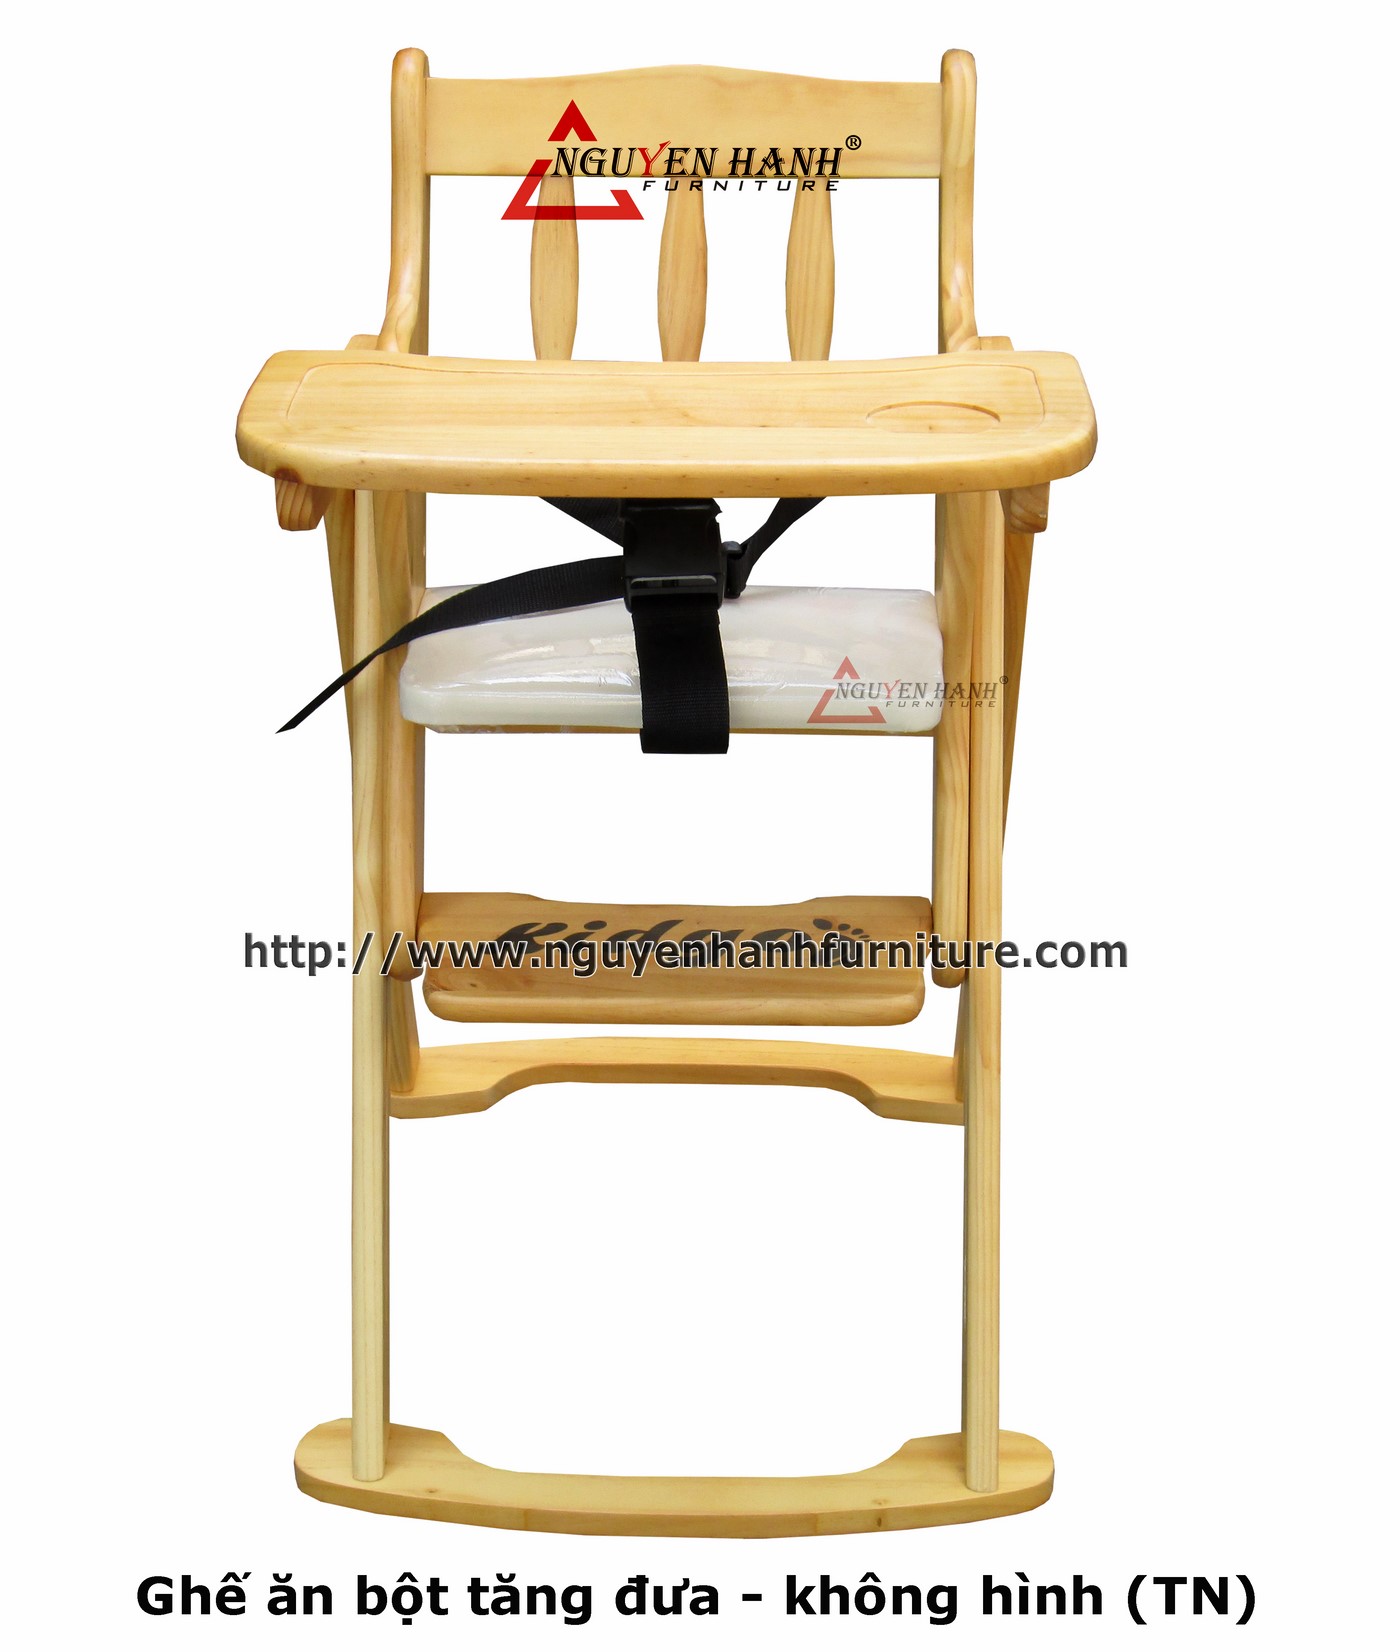 Name product: baby chair - Dimensions: - Description: Wood natural rubber